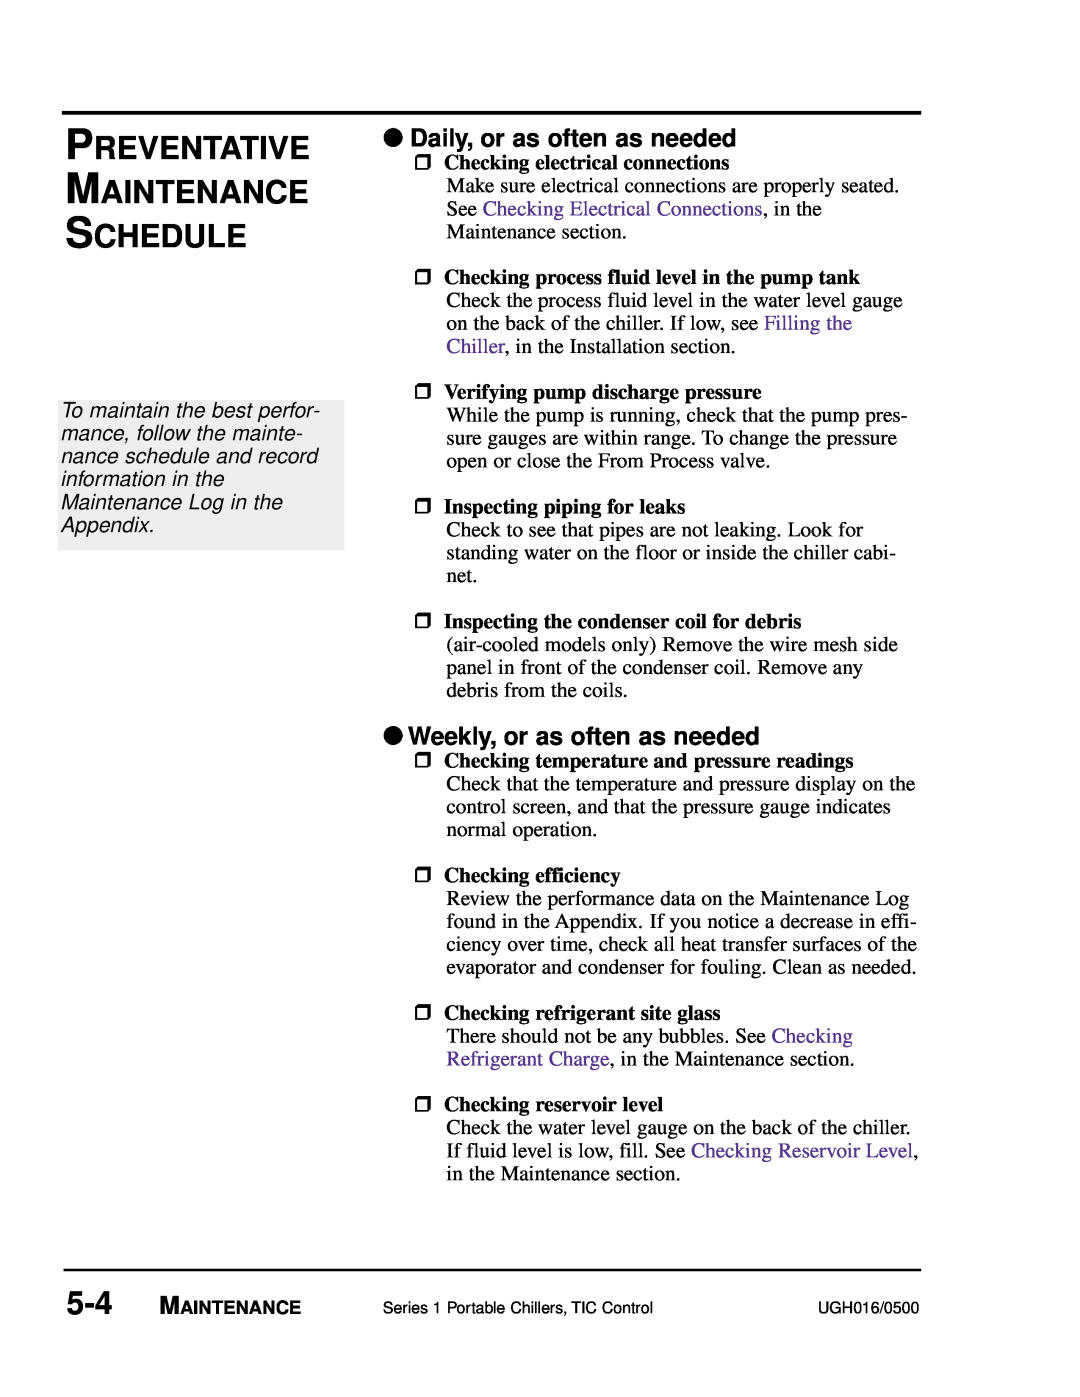 Conair UGH016/0500 manual Preventative Maintenance Schedule, Daily, or as often as needed, Weekly, or as often as needed 